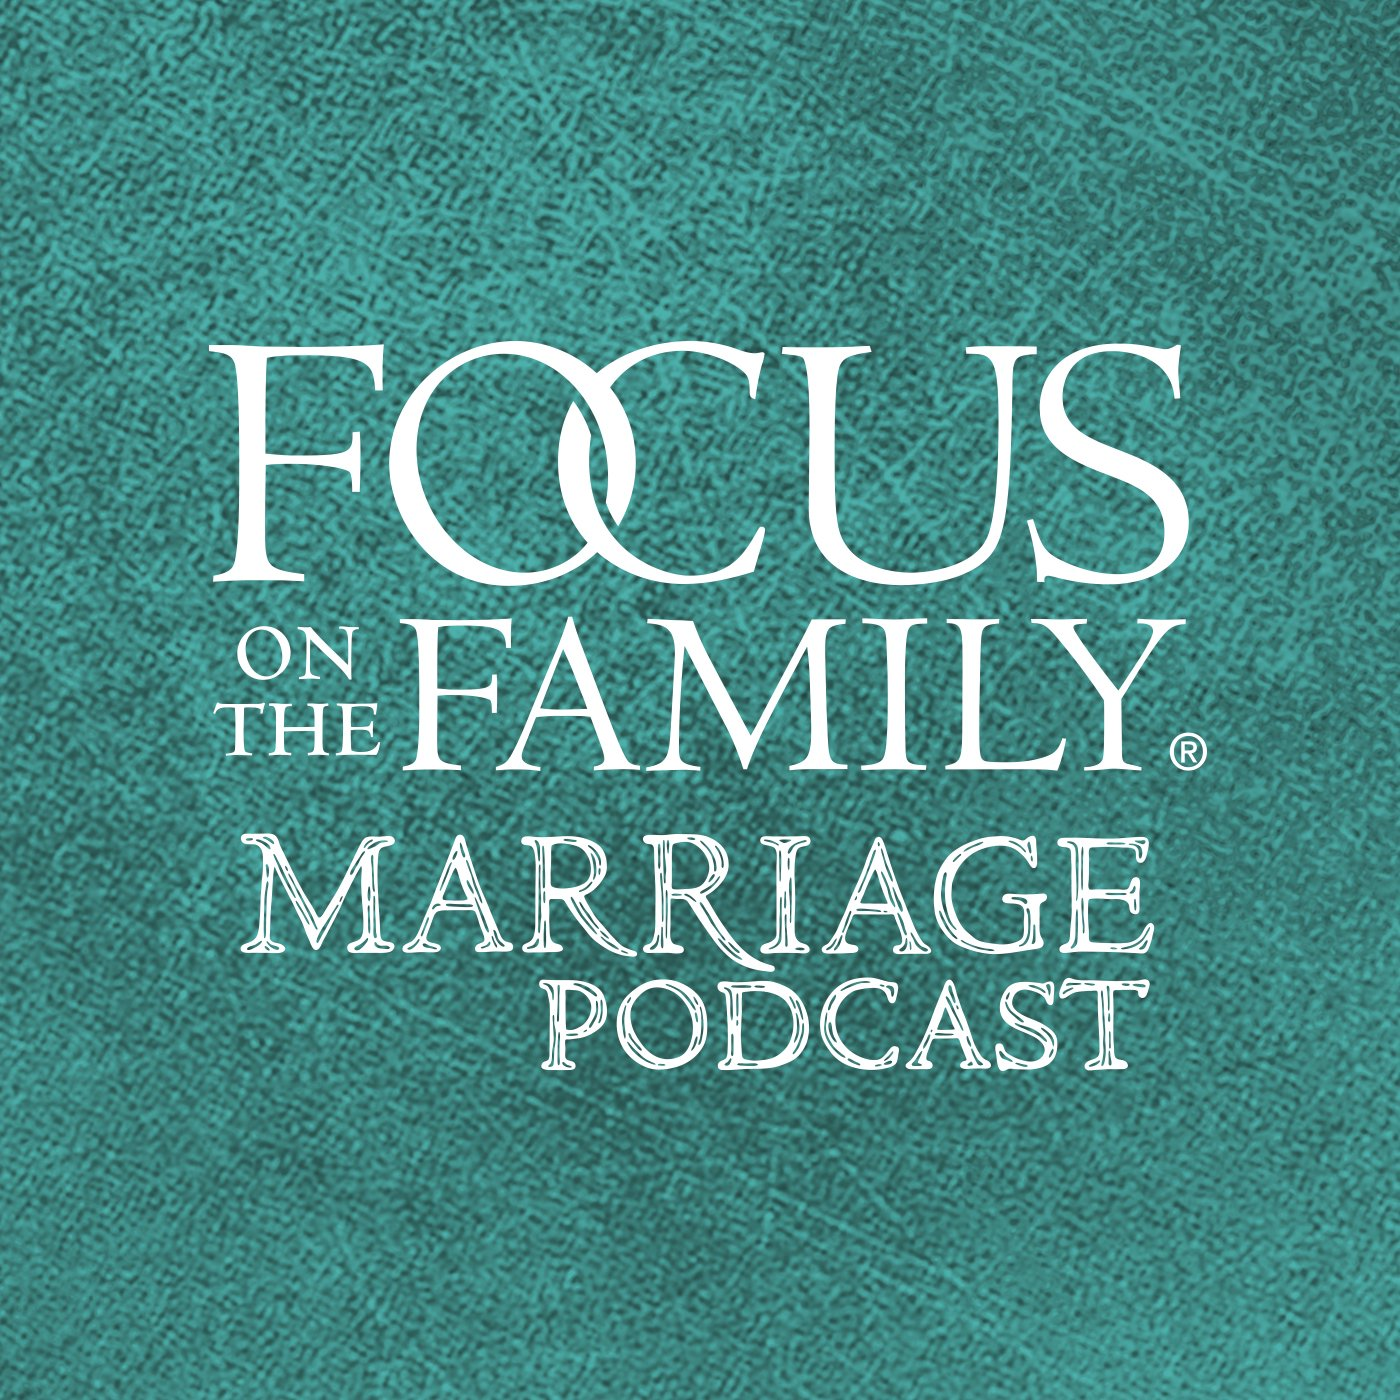 Helping Engaged Couples Become More We Focused, Part 3